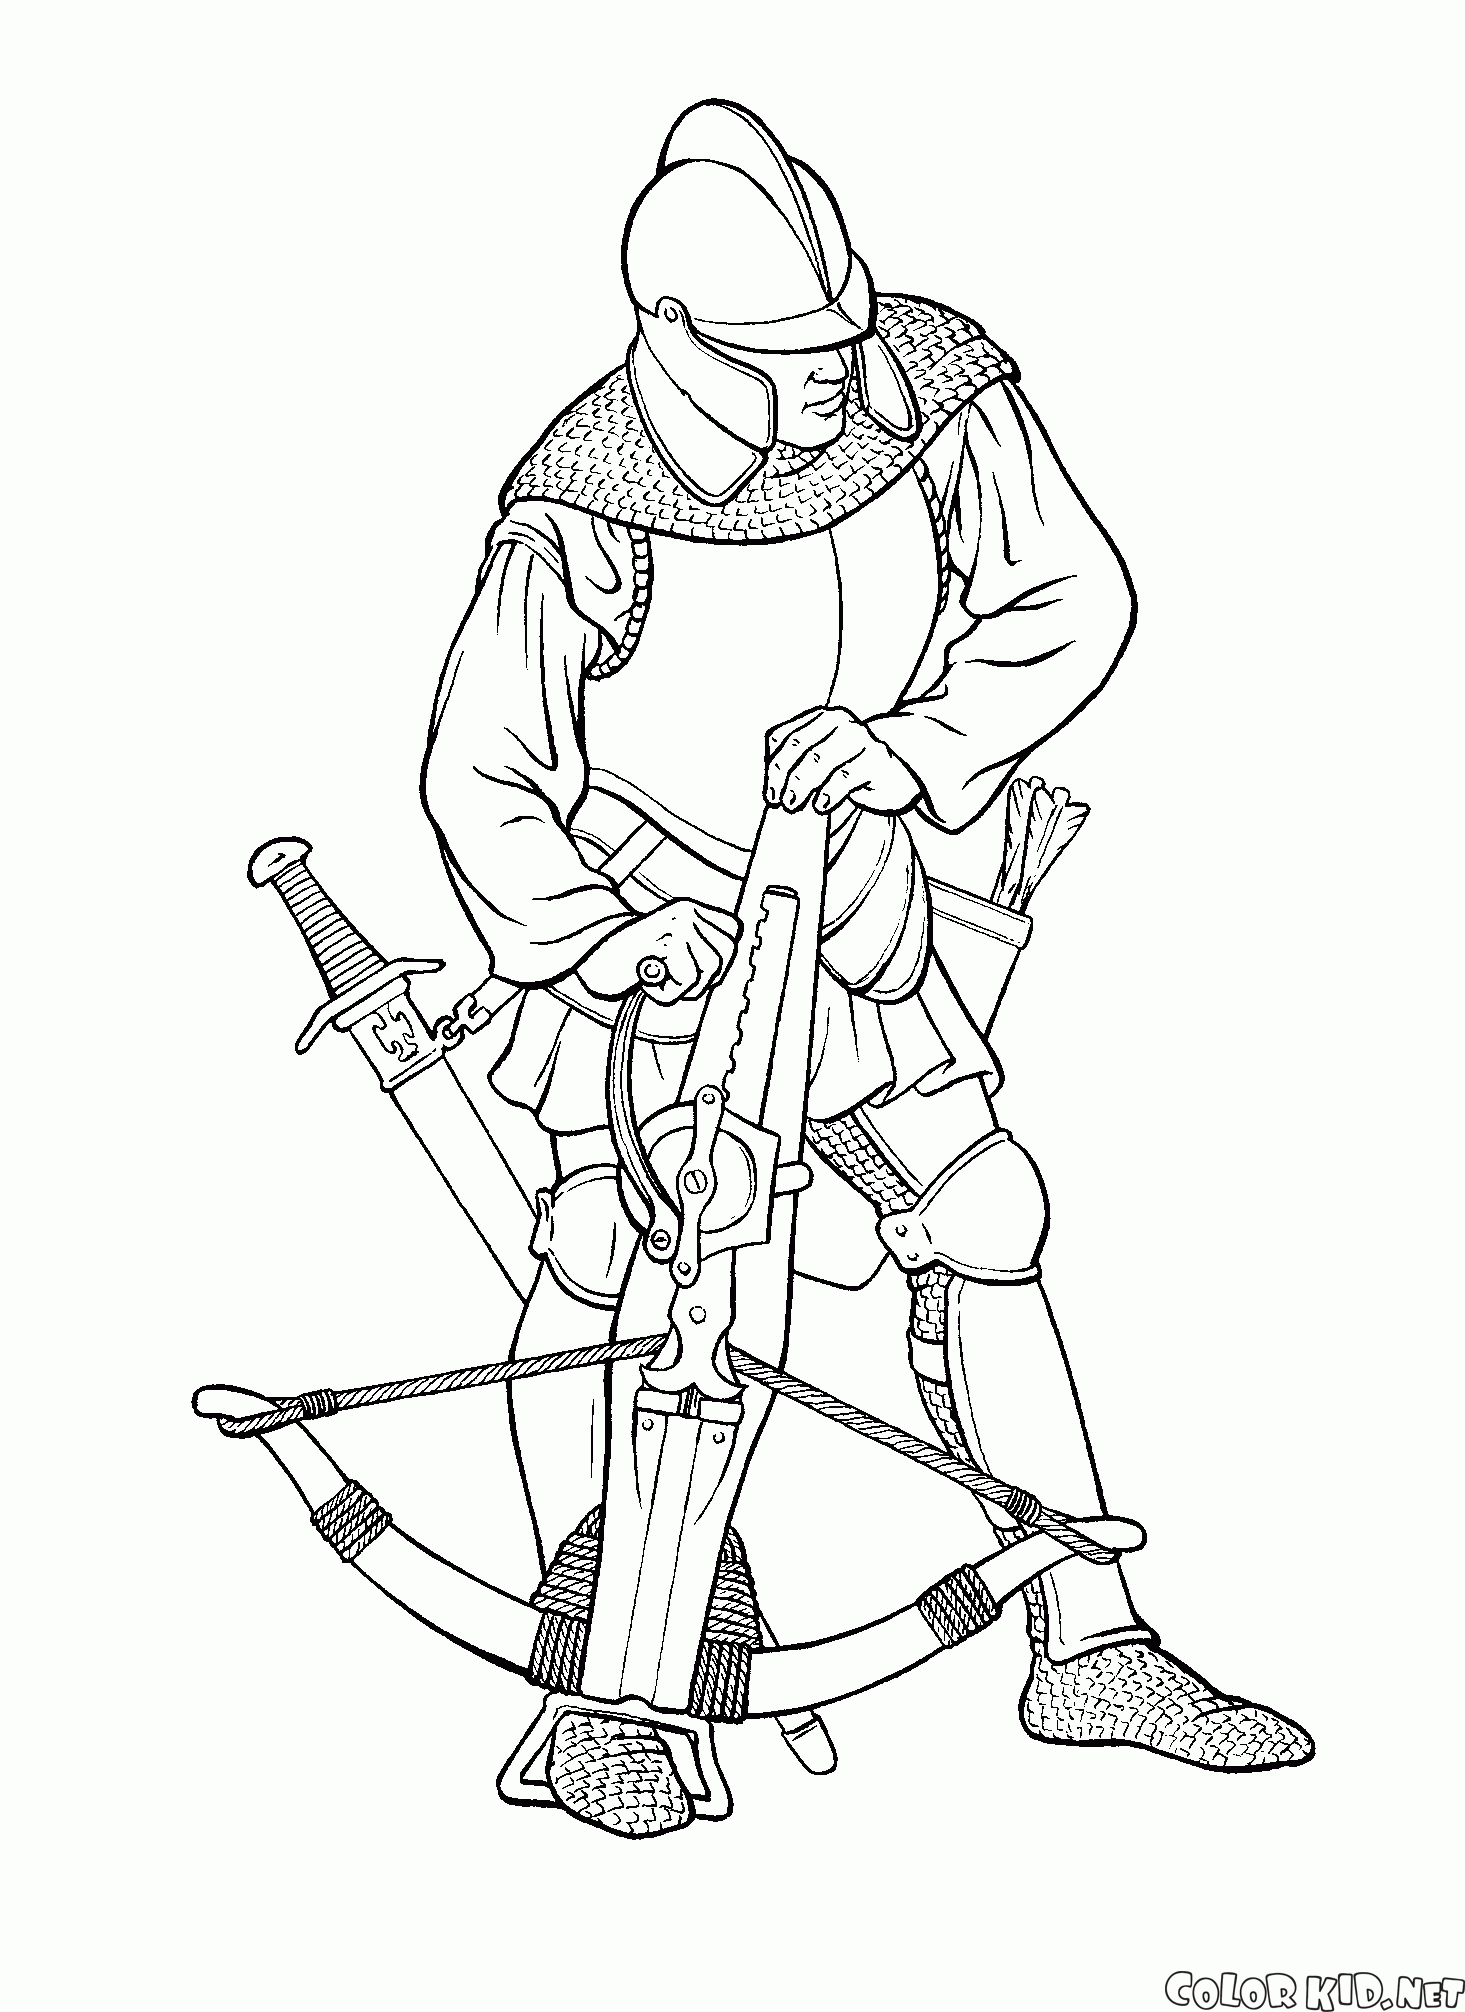 Warrior with a crossbow